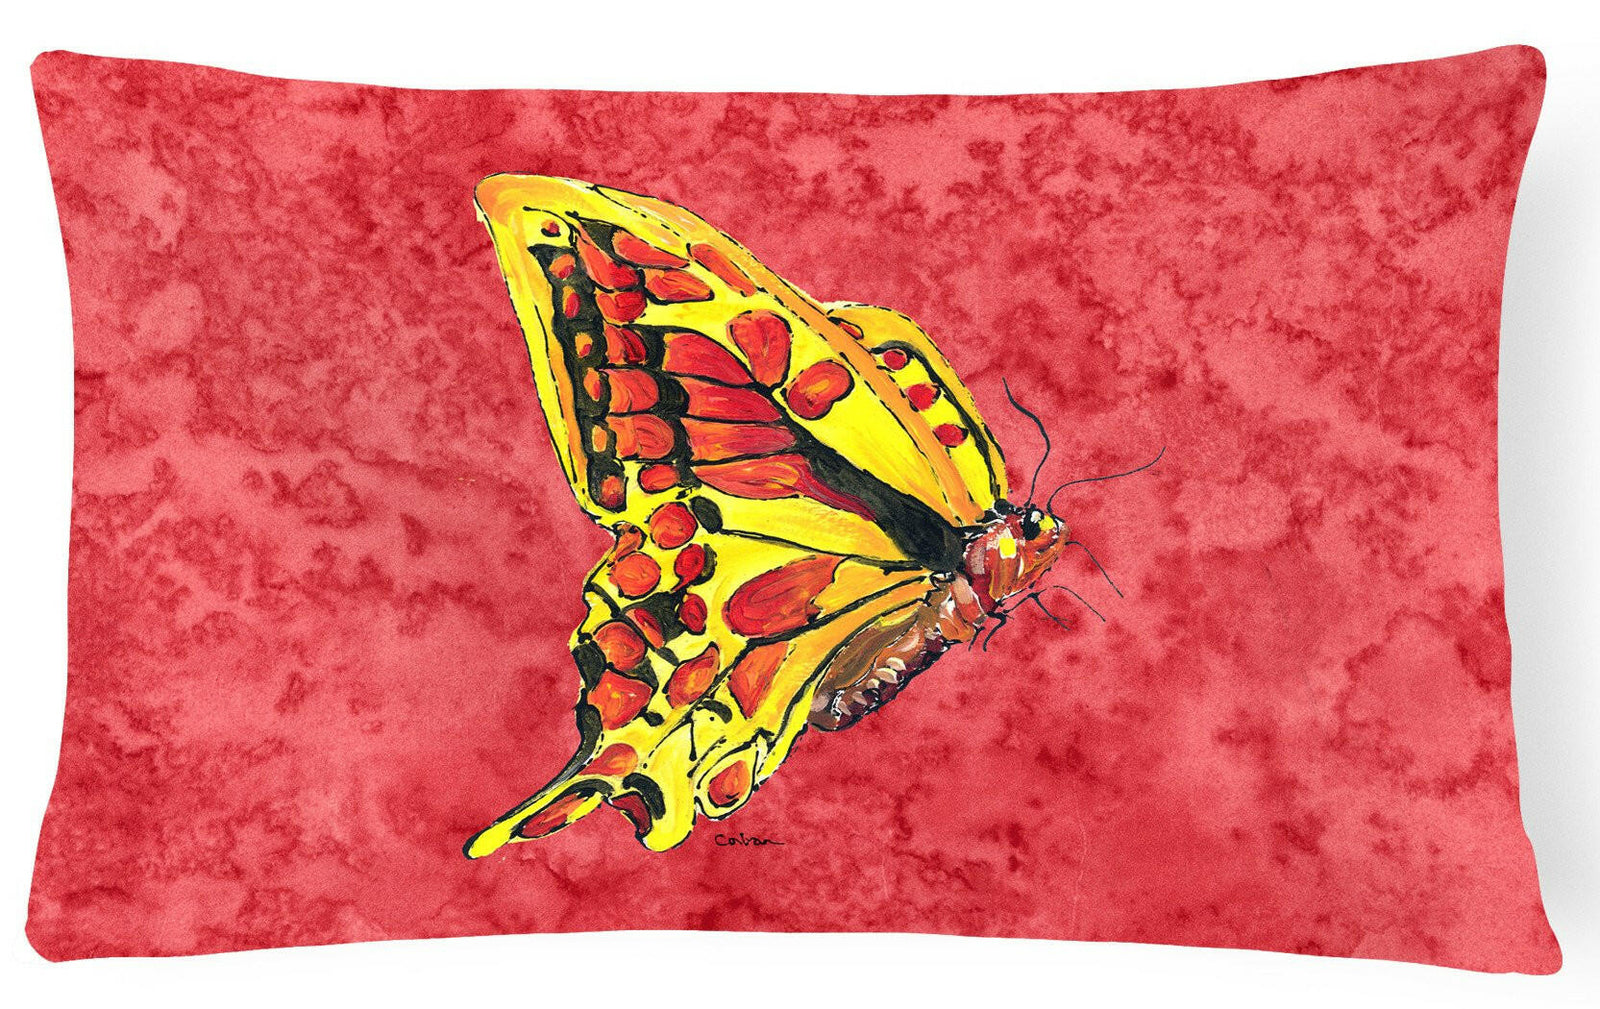 Butterfly on Red   Canvas Fabric Decorative Pillow by Caroline's Treasures